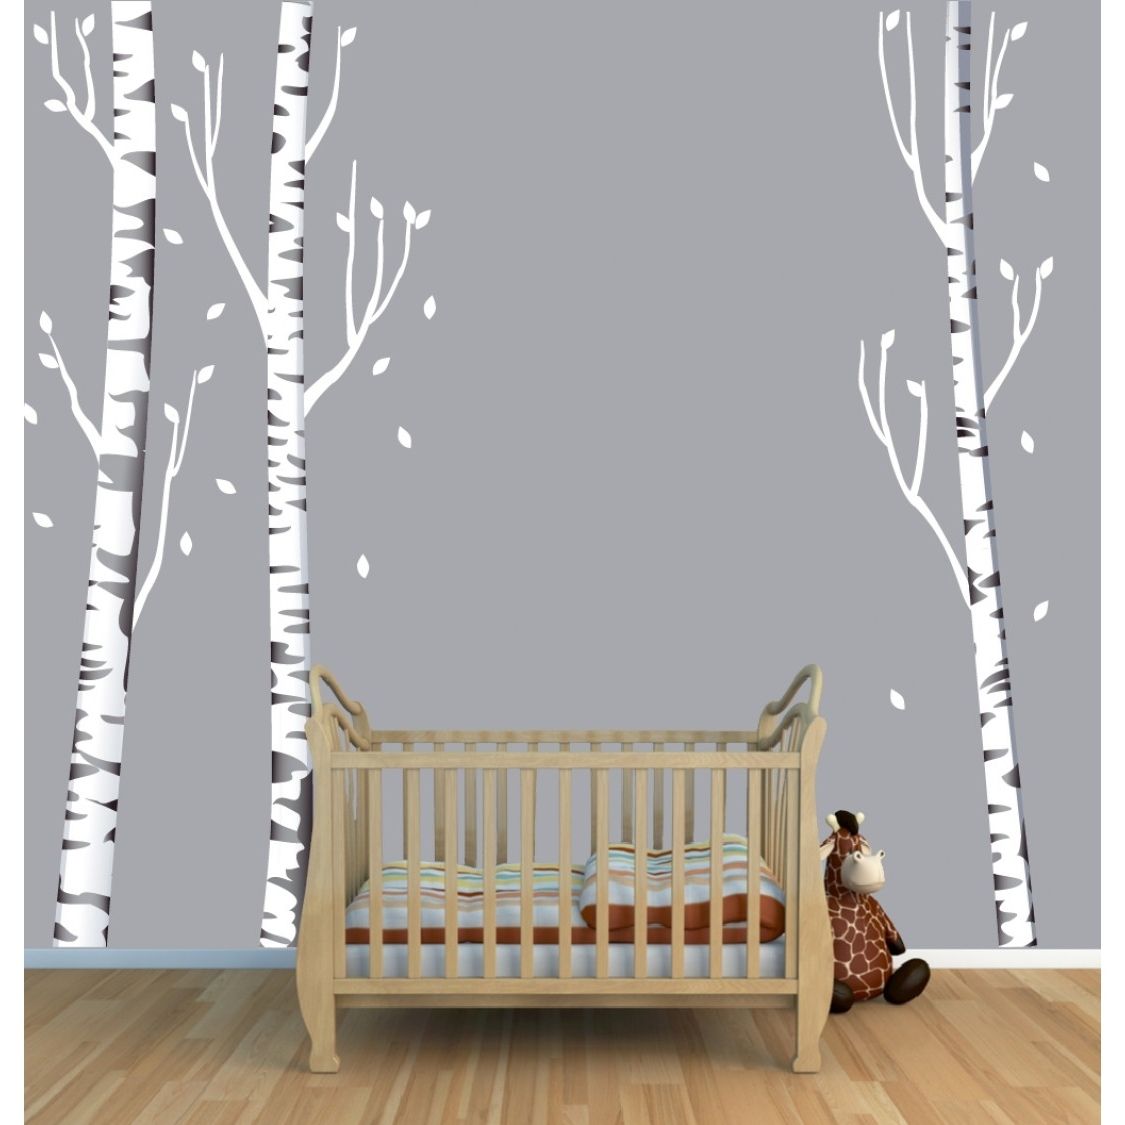 Birch Tree Wall Art For Recent Tree Wall Art With Birch Tree Wall Decals For Kids Rooms (View 4 of 15)